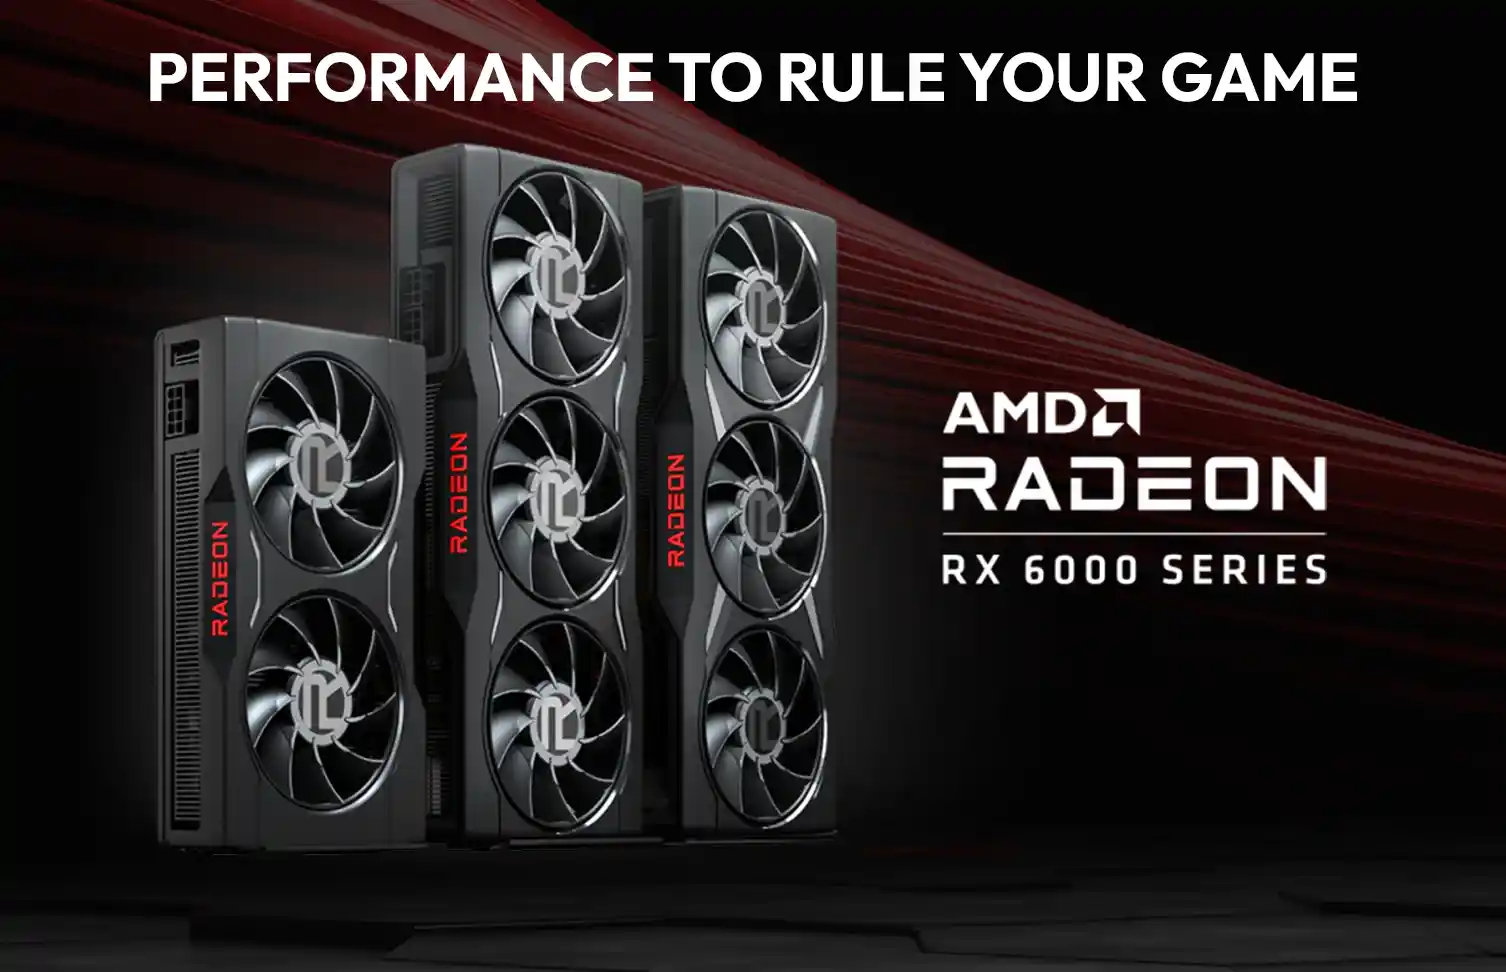 AMD Radeon RX 6950 XT, RX 6750 XT, RX 6650 XT 'RDNA 2 Refresh' Graphics  Cards - Here's Everything We Know So Far - Wccftech